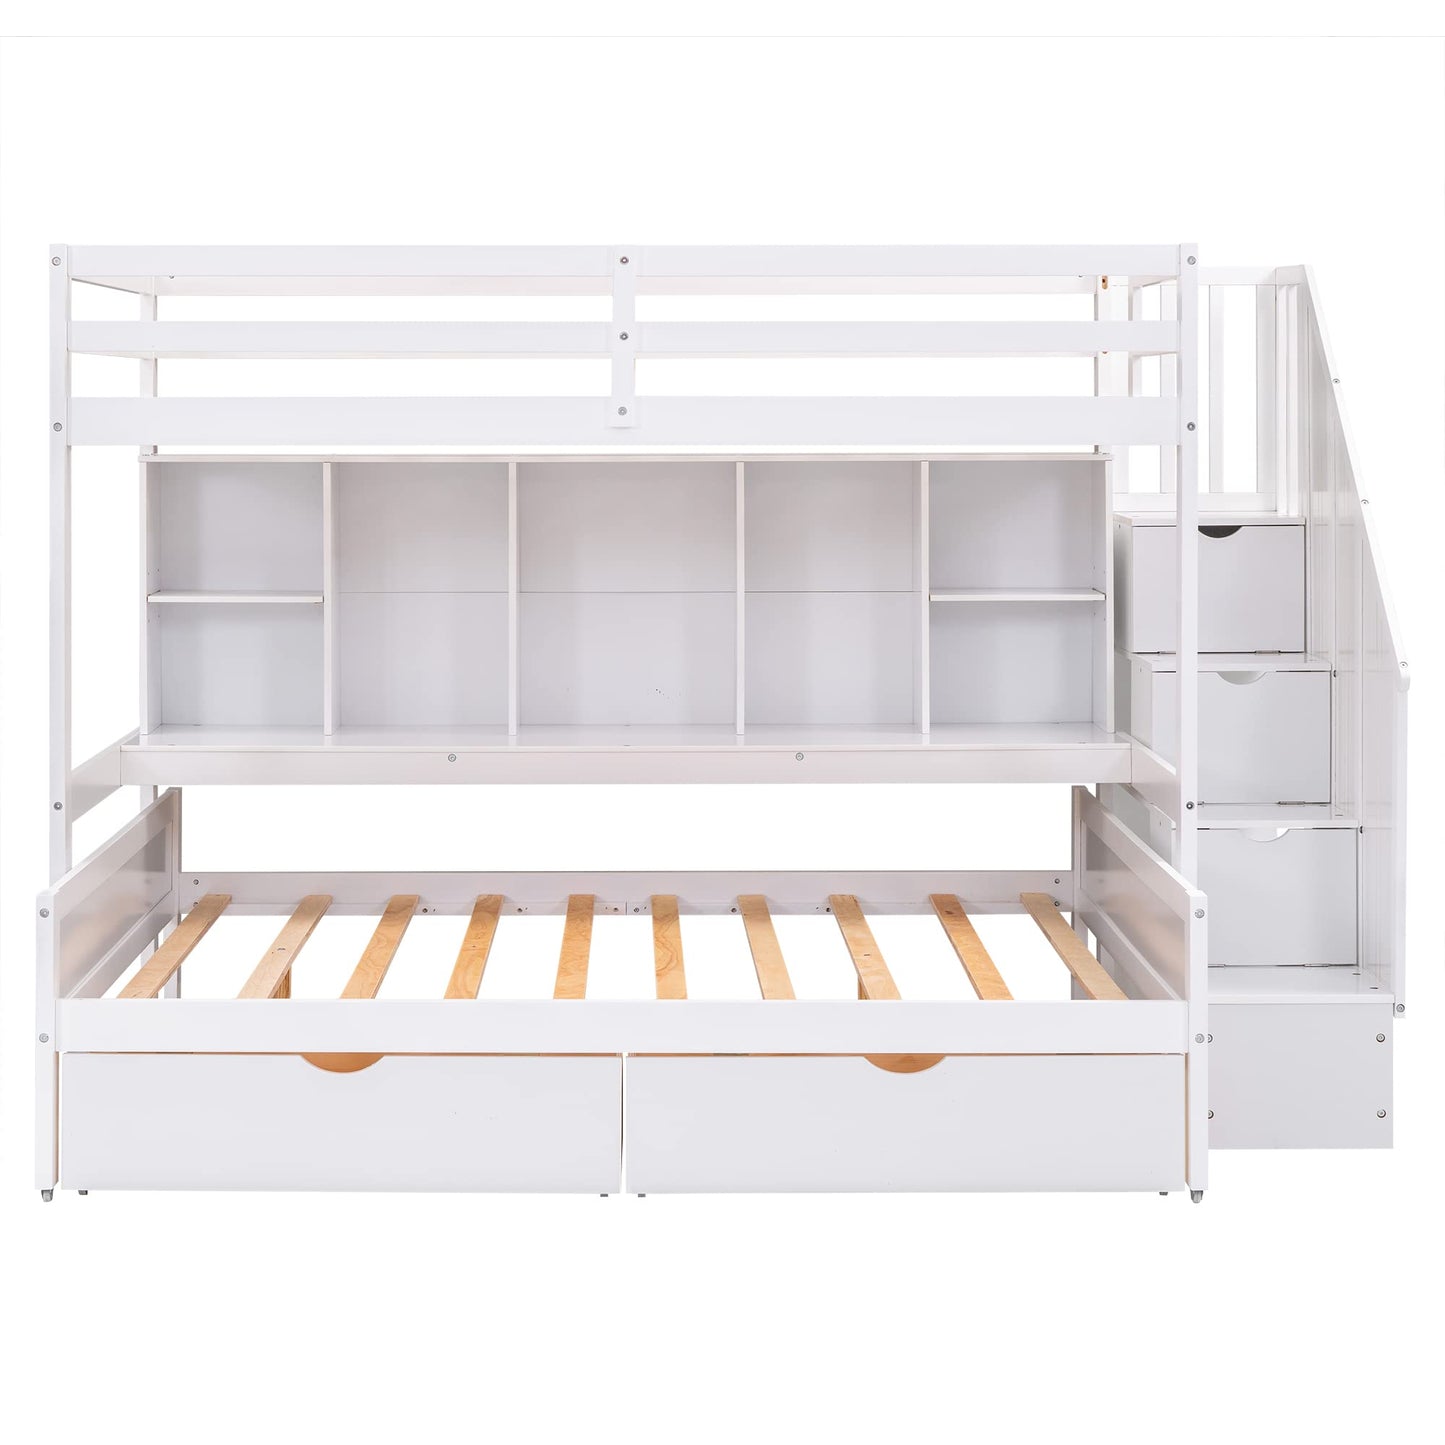 BIADNBZ Twin XL Over Full Bunk Bed with Stairs, Built-in Storage Shelves and Drawers, Convertible BunkBed into 2 Bedframe, for Kids/Teens/Adults Bedroom, White